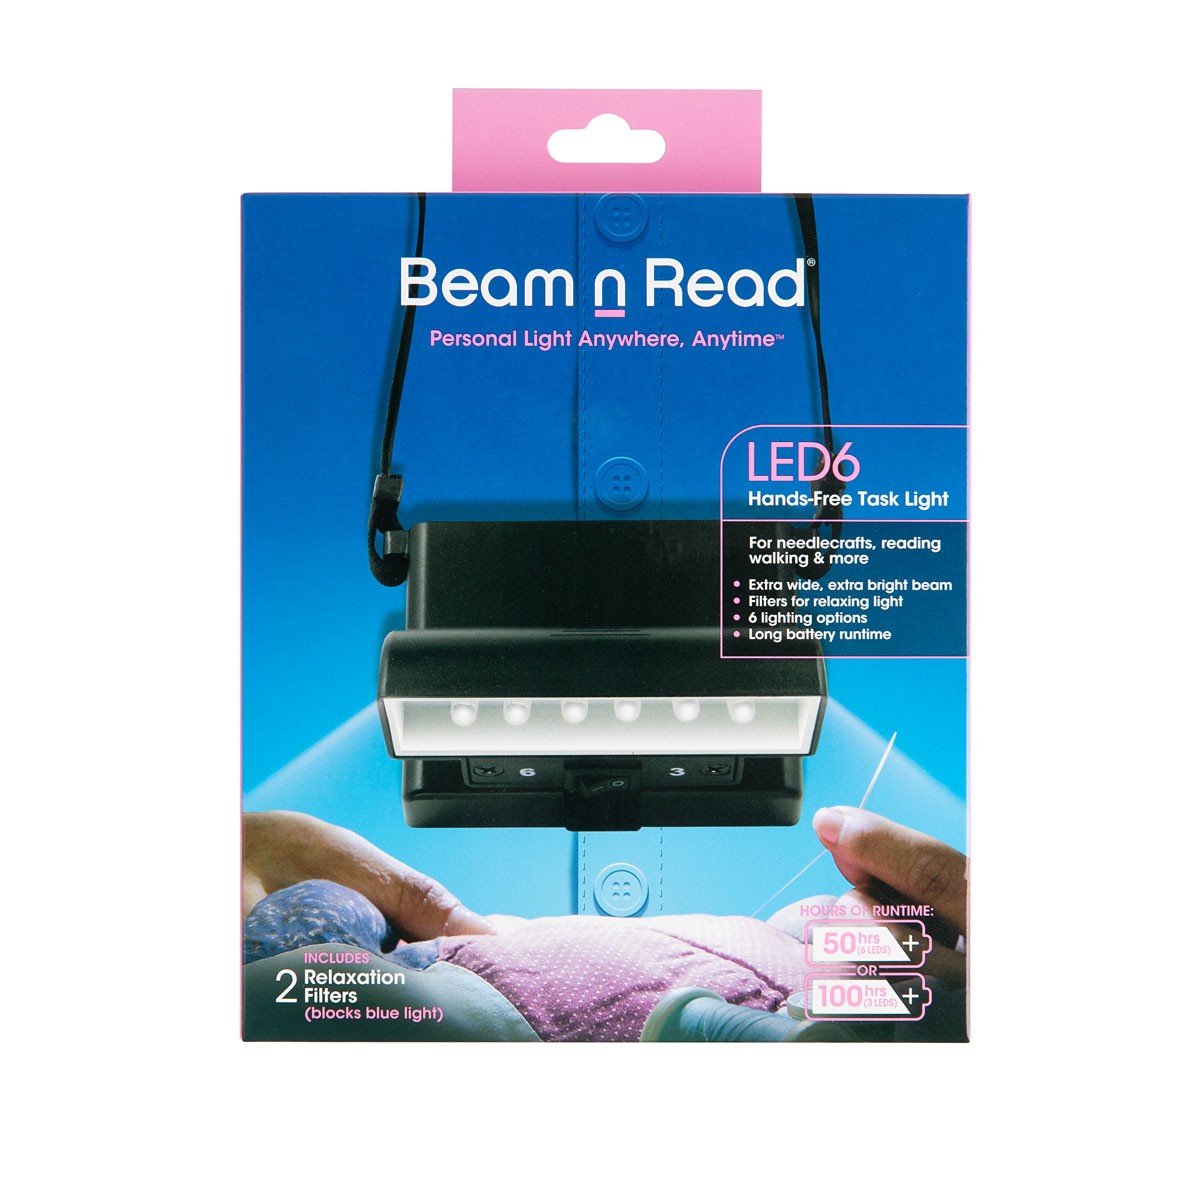 Beam n Read LED 6m Hands-Free Craft Light - Needlework Projects, Tools &  Accessories